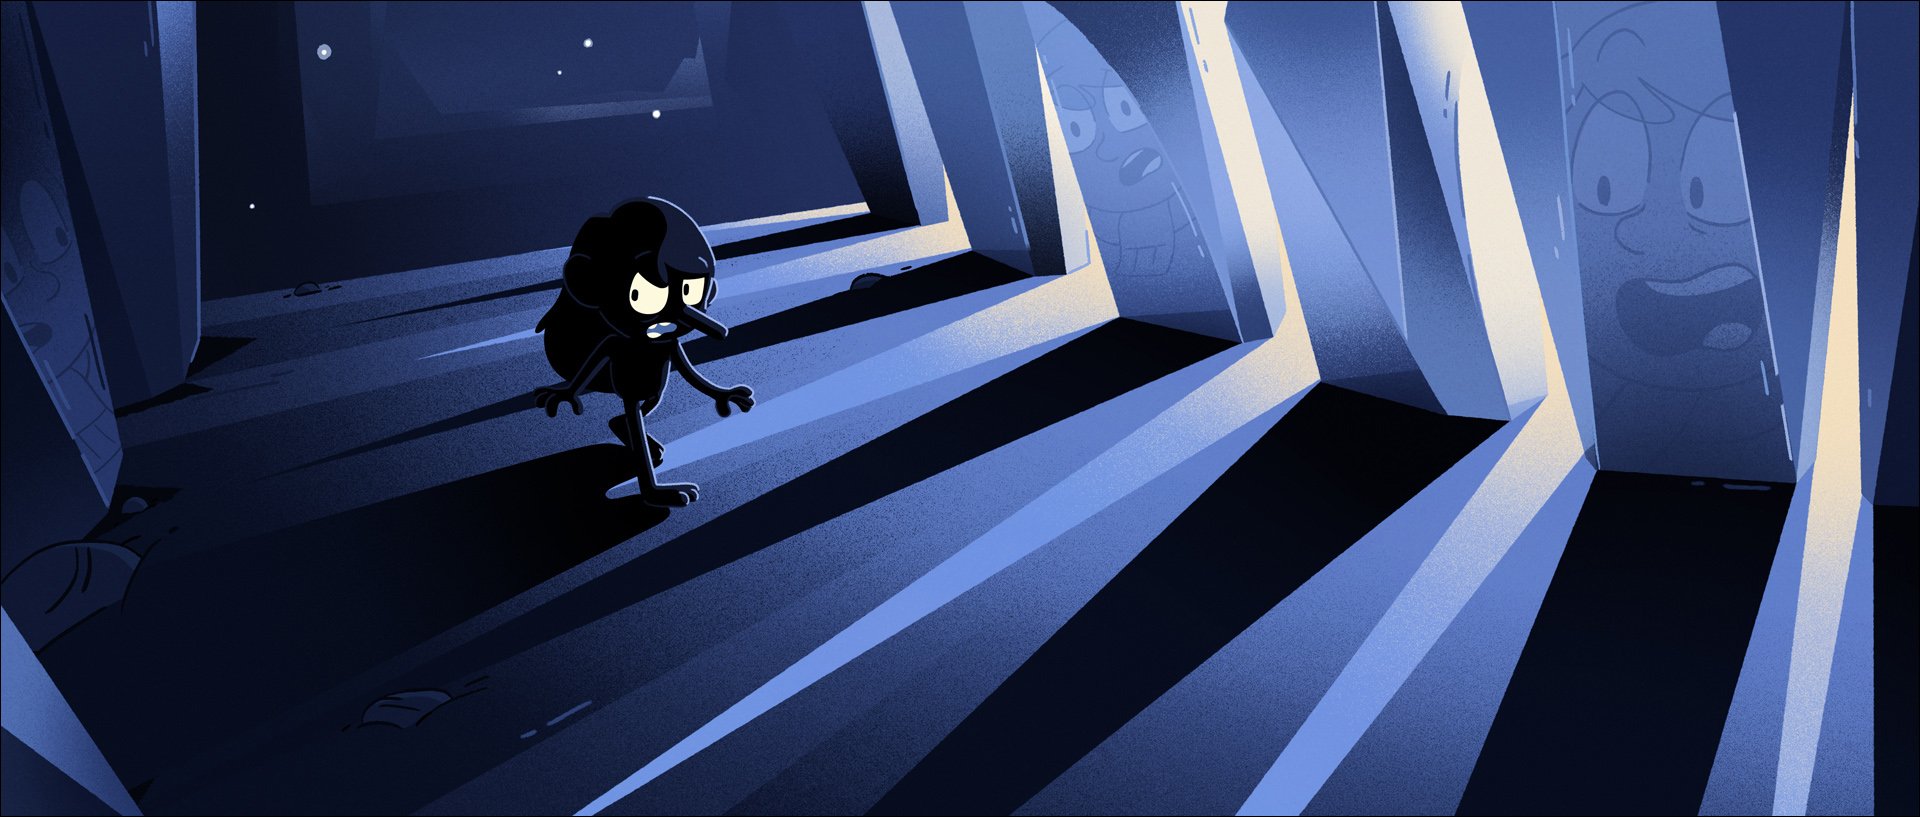 bendy and the ink machine song on Vimeo